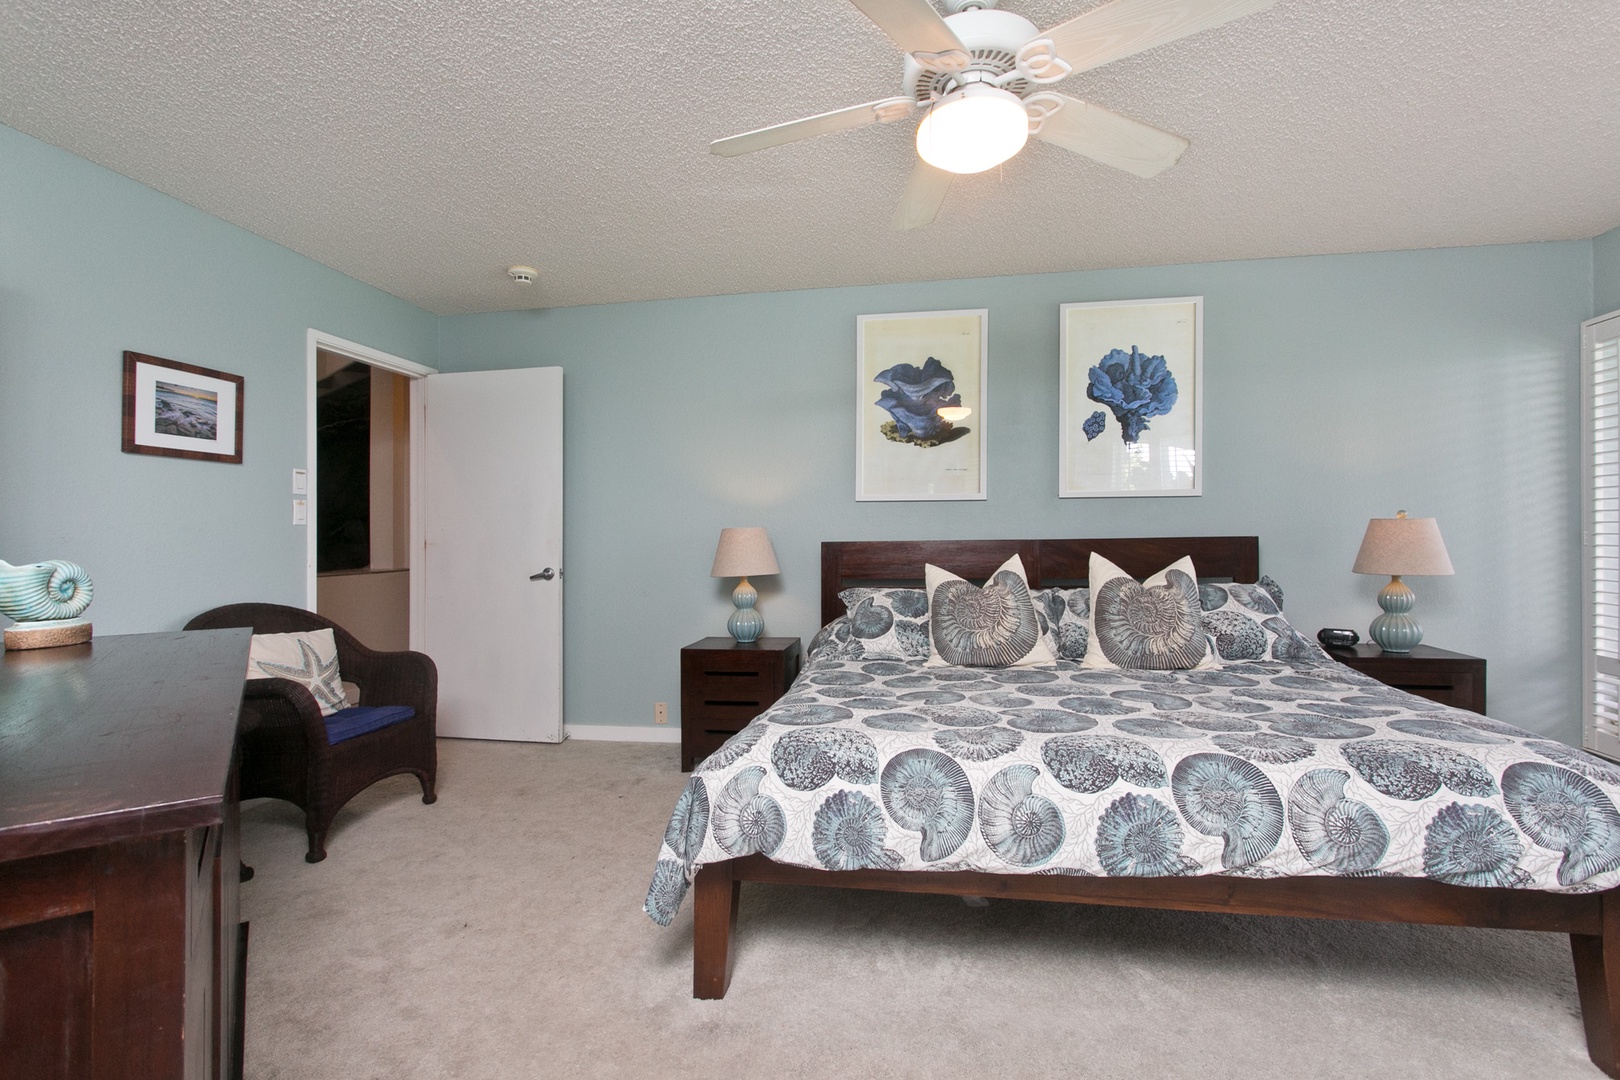 Kailua Vacation Rentals, Hale Kolea* - Guest bedroom provides a king bed, ceiling fan and additional seating area